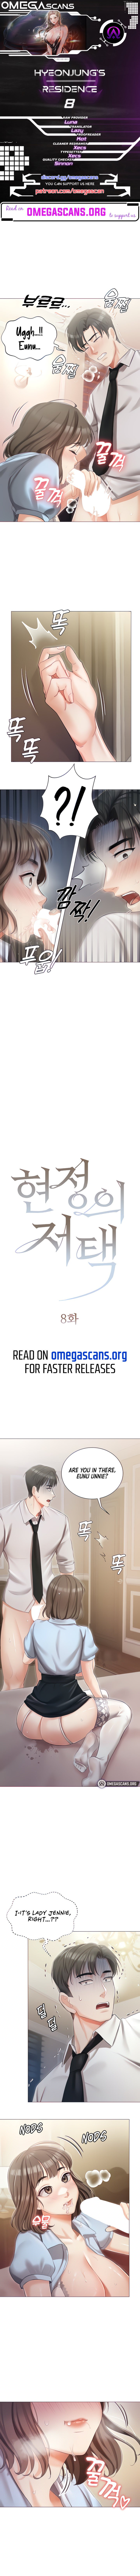 hyeonjungs-residence-chap-8-0